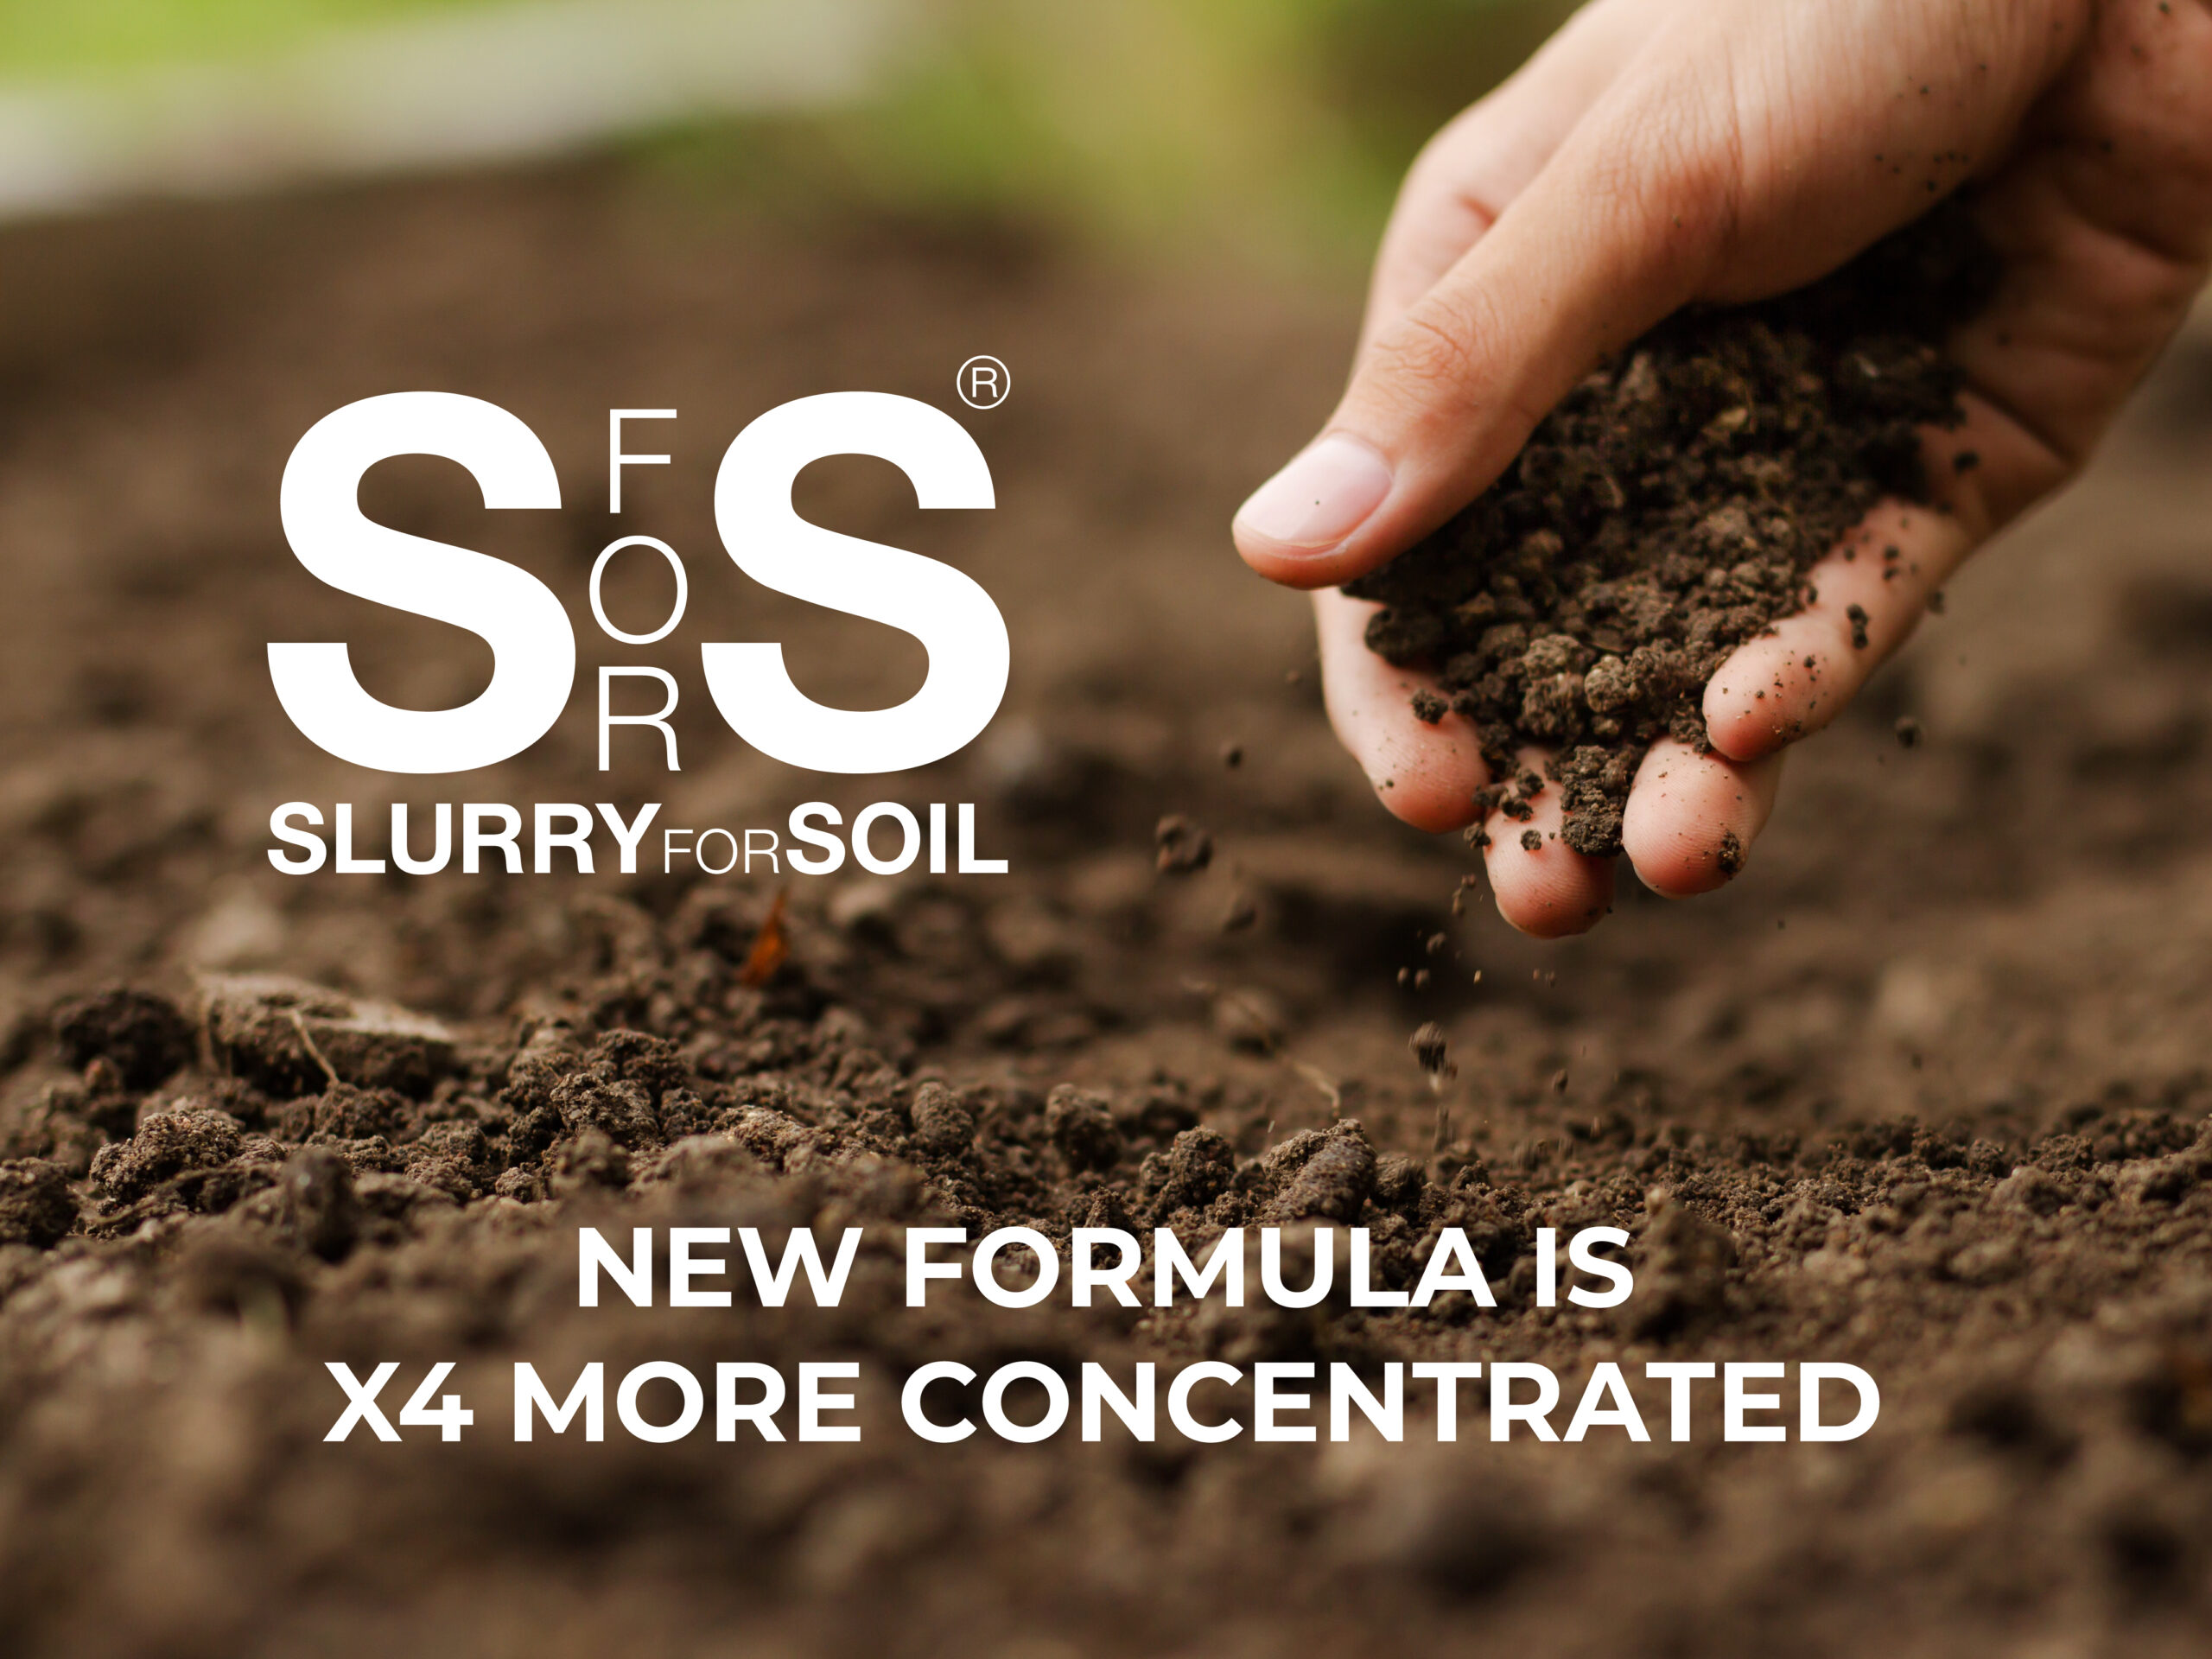 New formula is x4 more concentrated